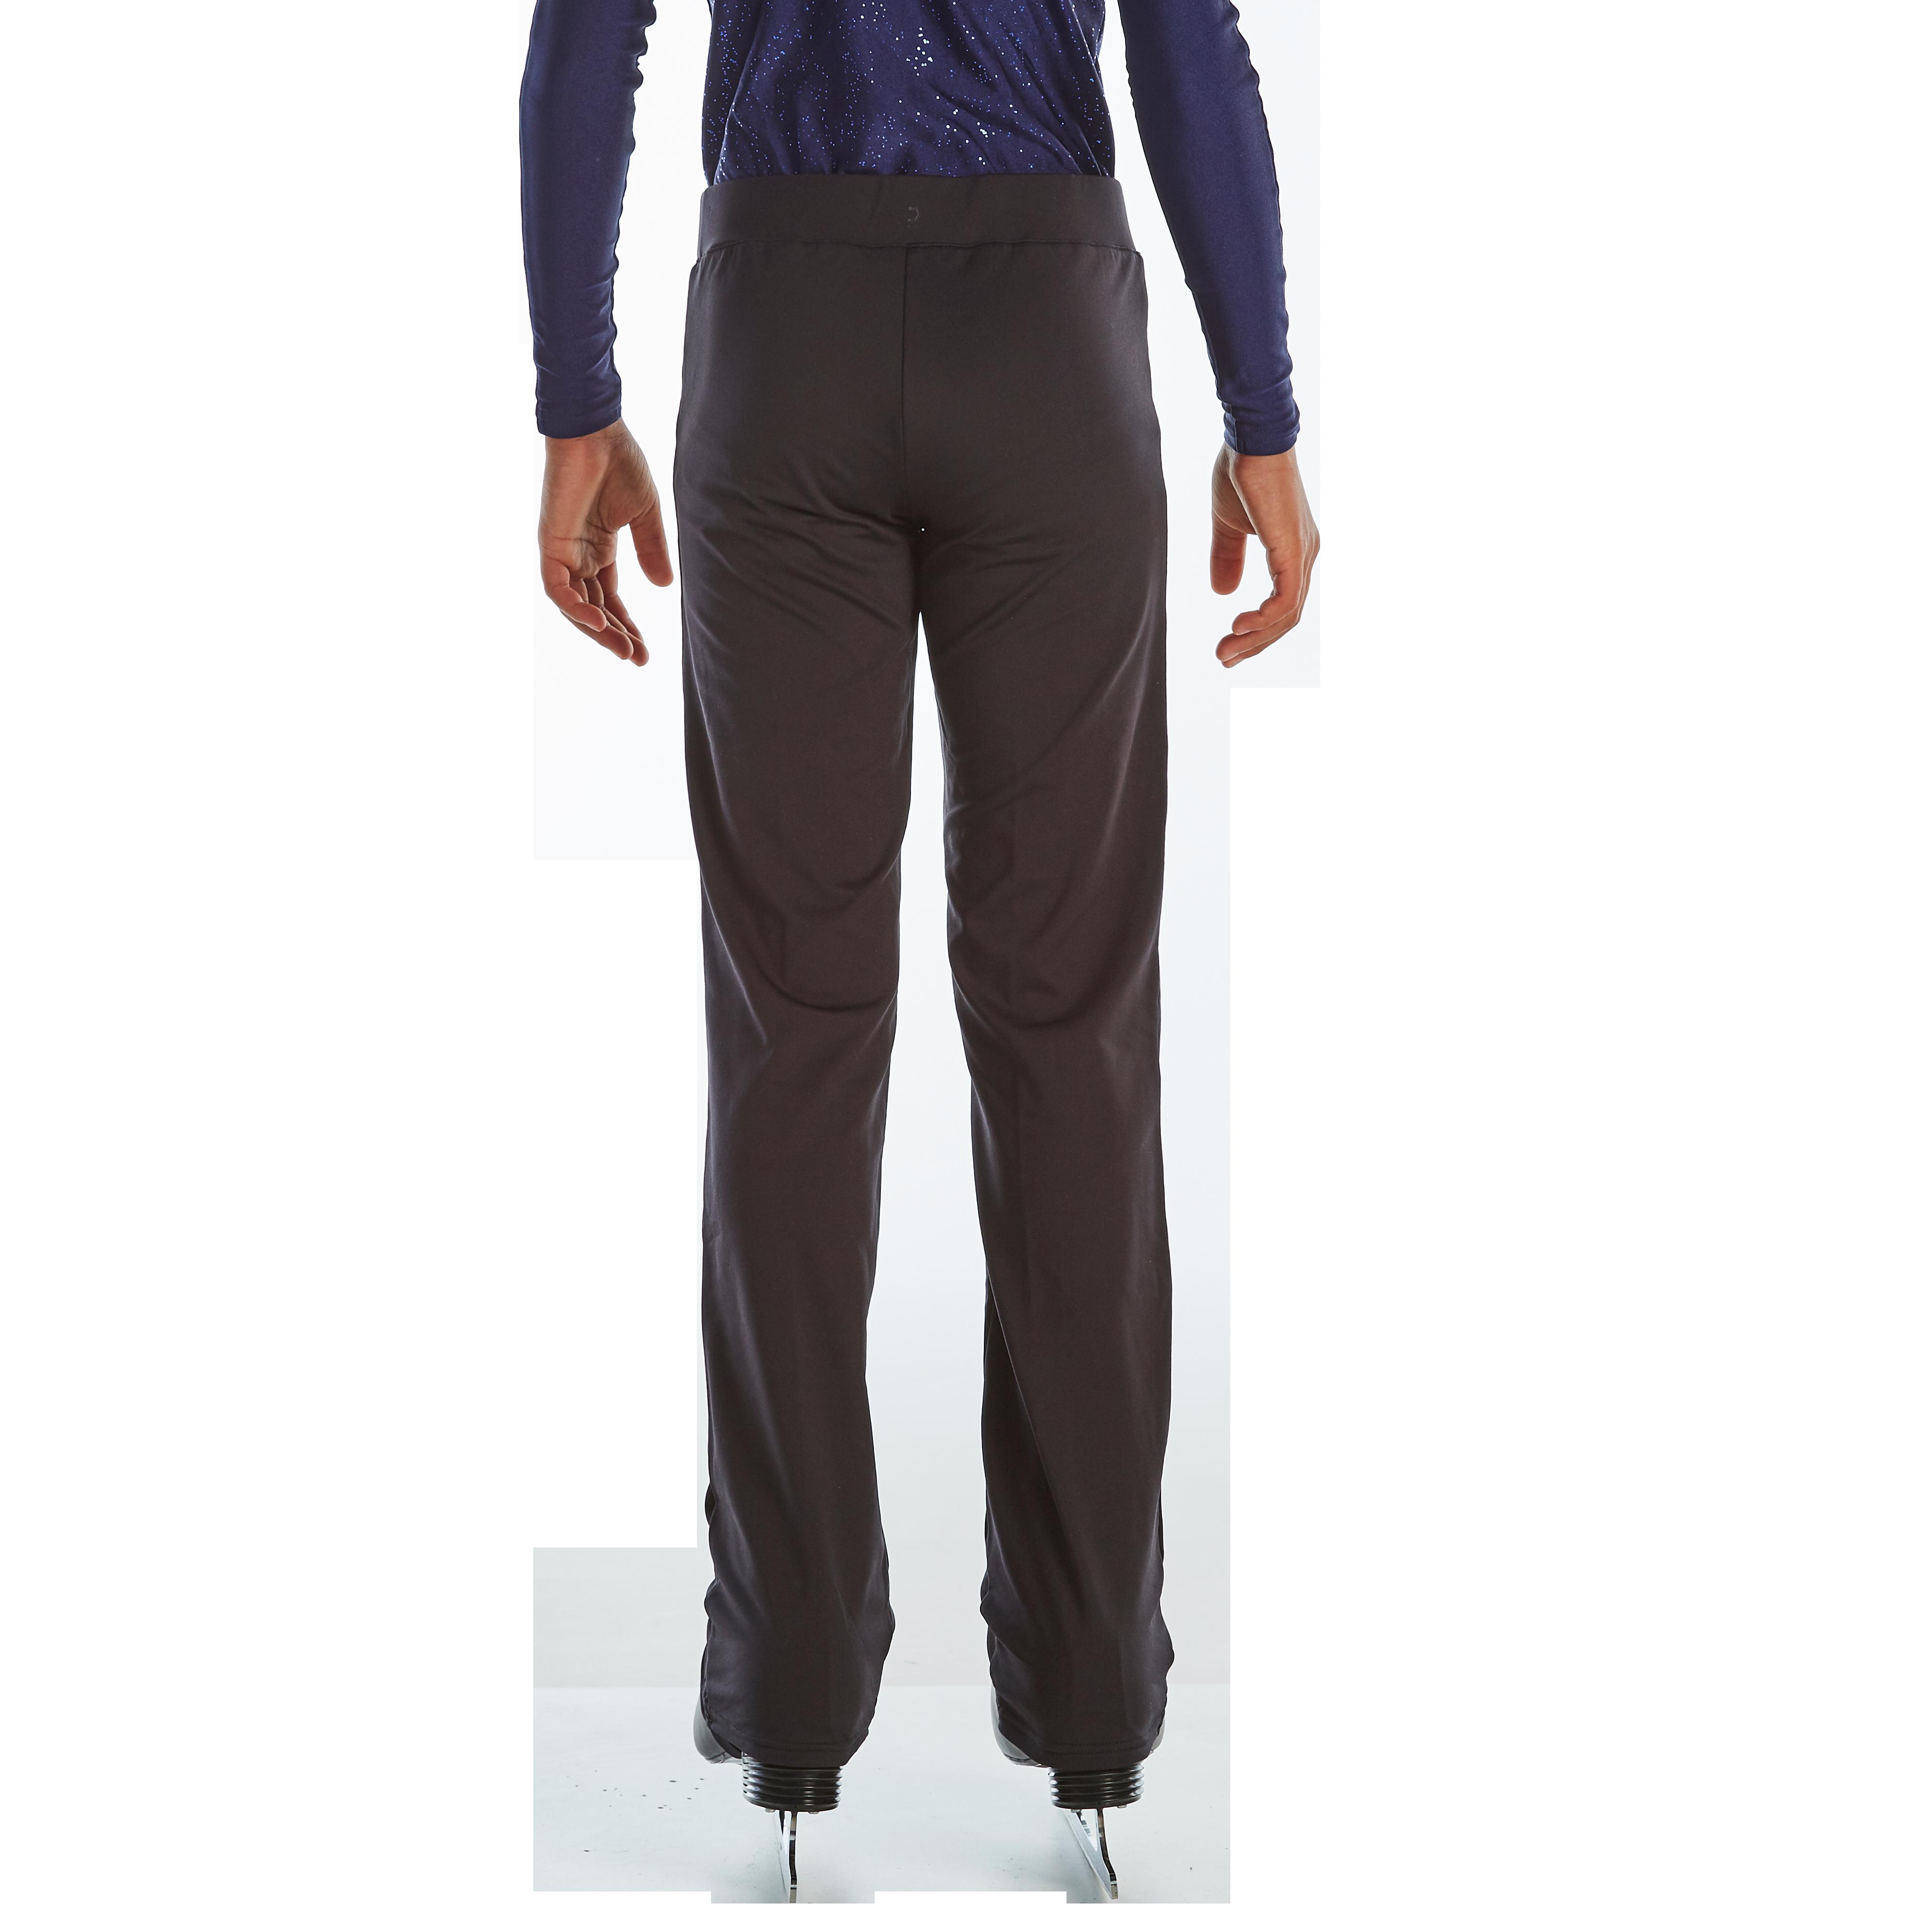 Trousers & Joggers, Decathlon Figure Skating Bottoms